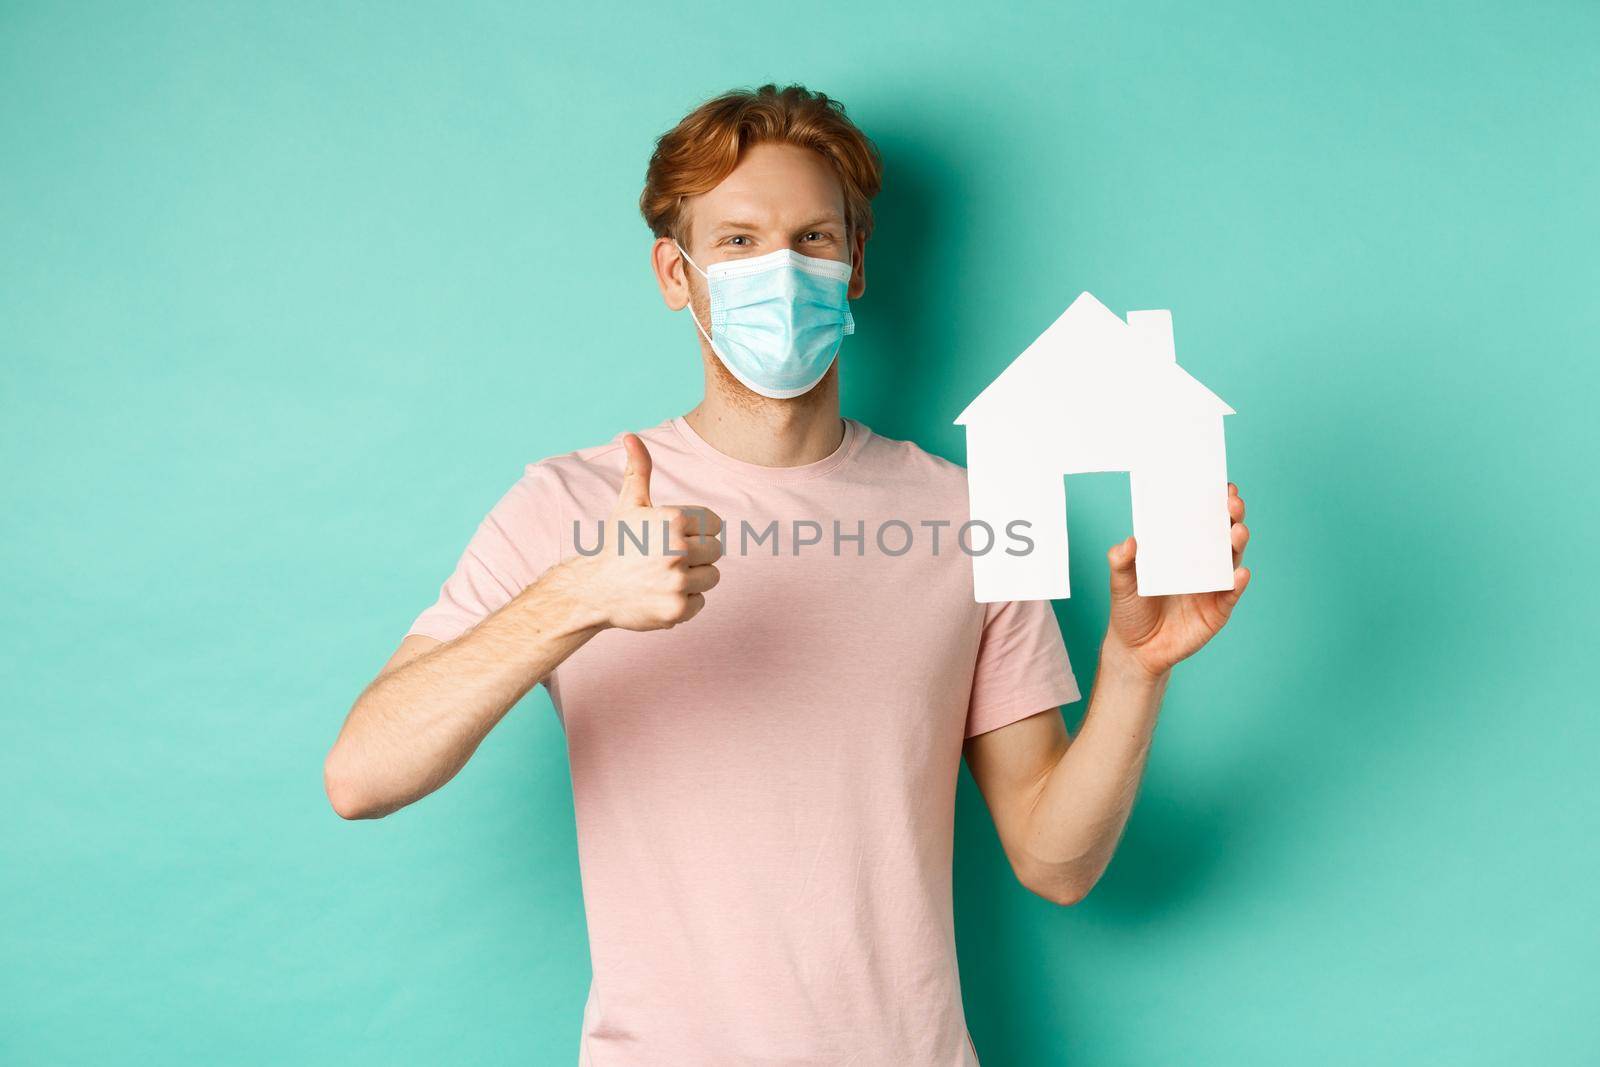 Covid-19 and real estate concept. Cheerful guy in face mask showing house cutout and thumbs-up, standing over turquoise background.